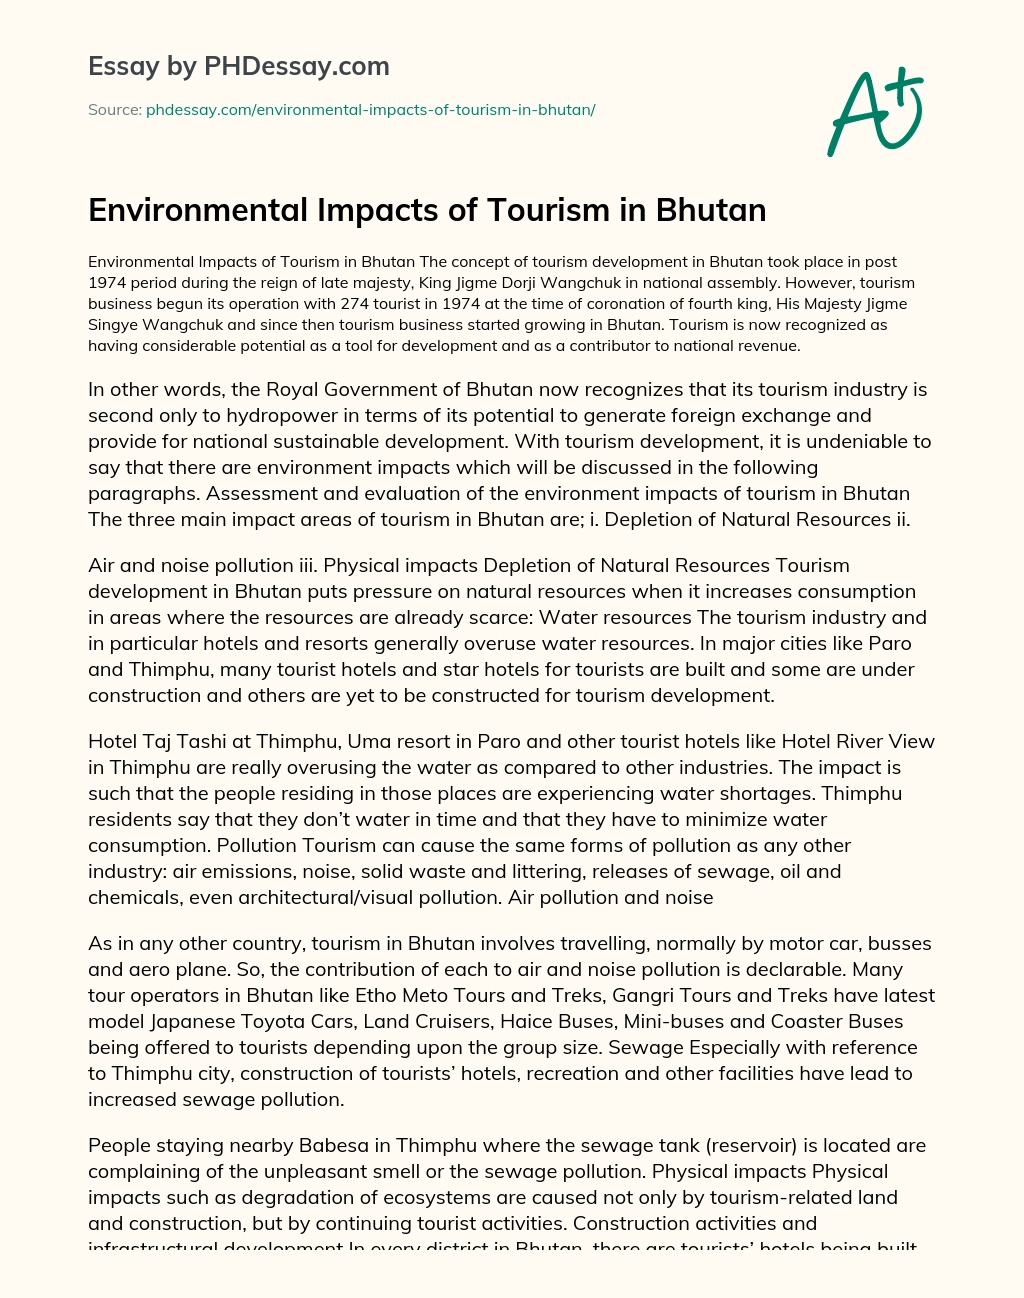 Environmental Impacts of Tourism in Bhutan essay